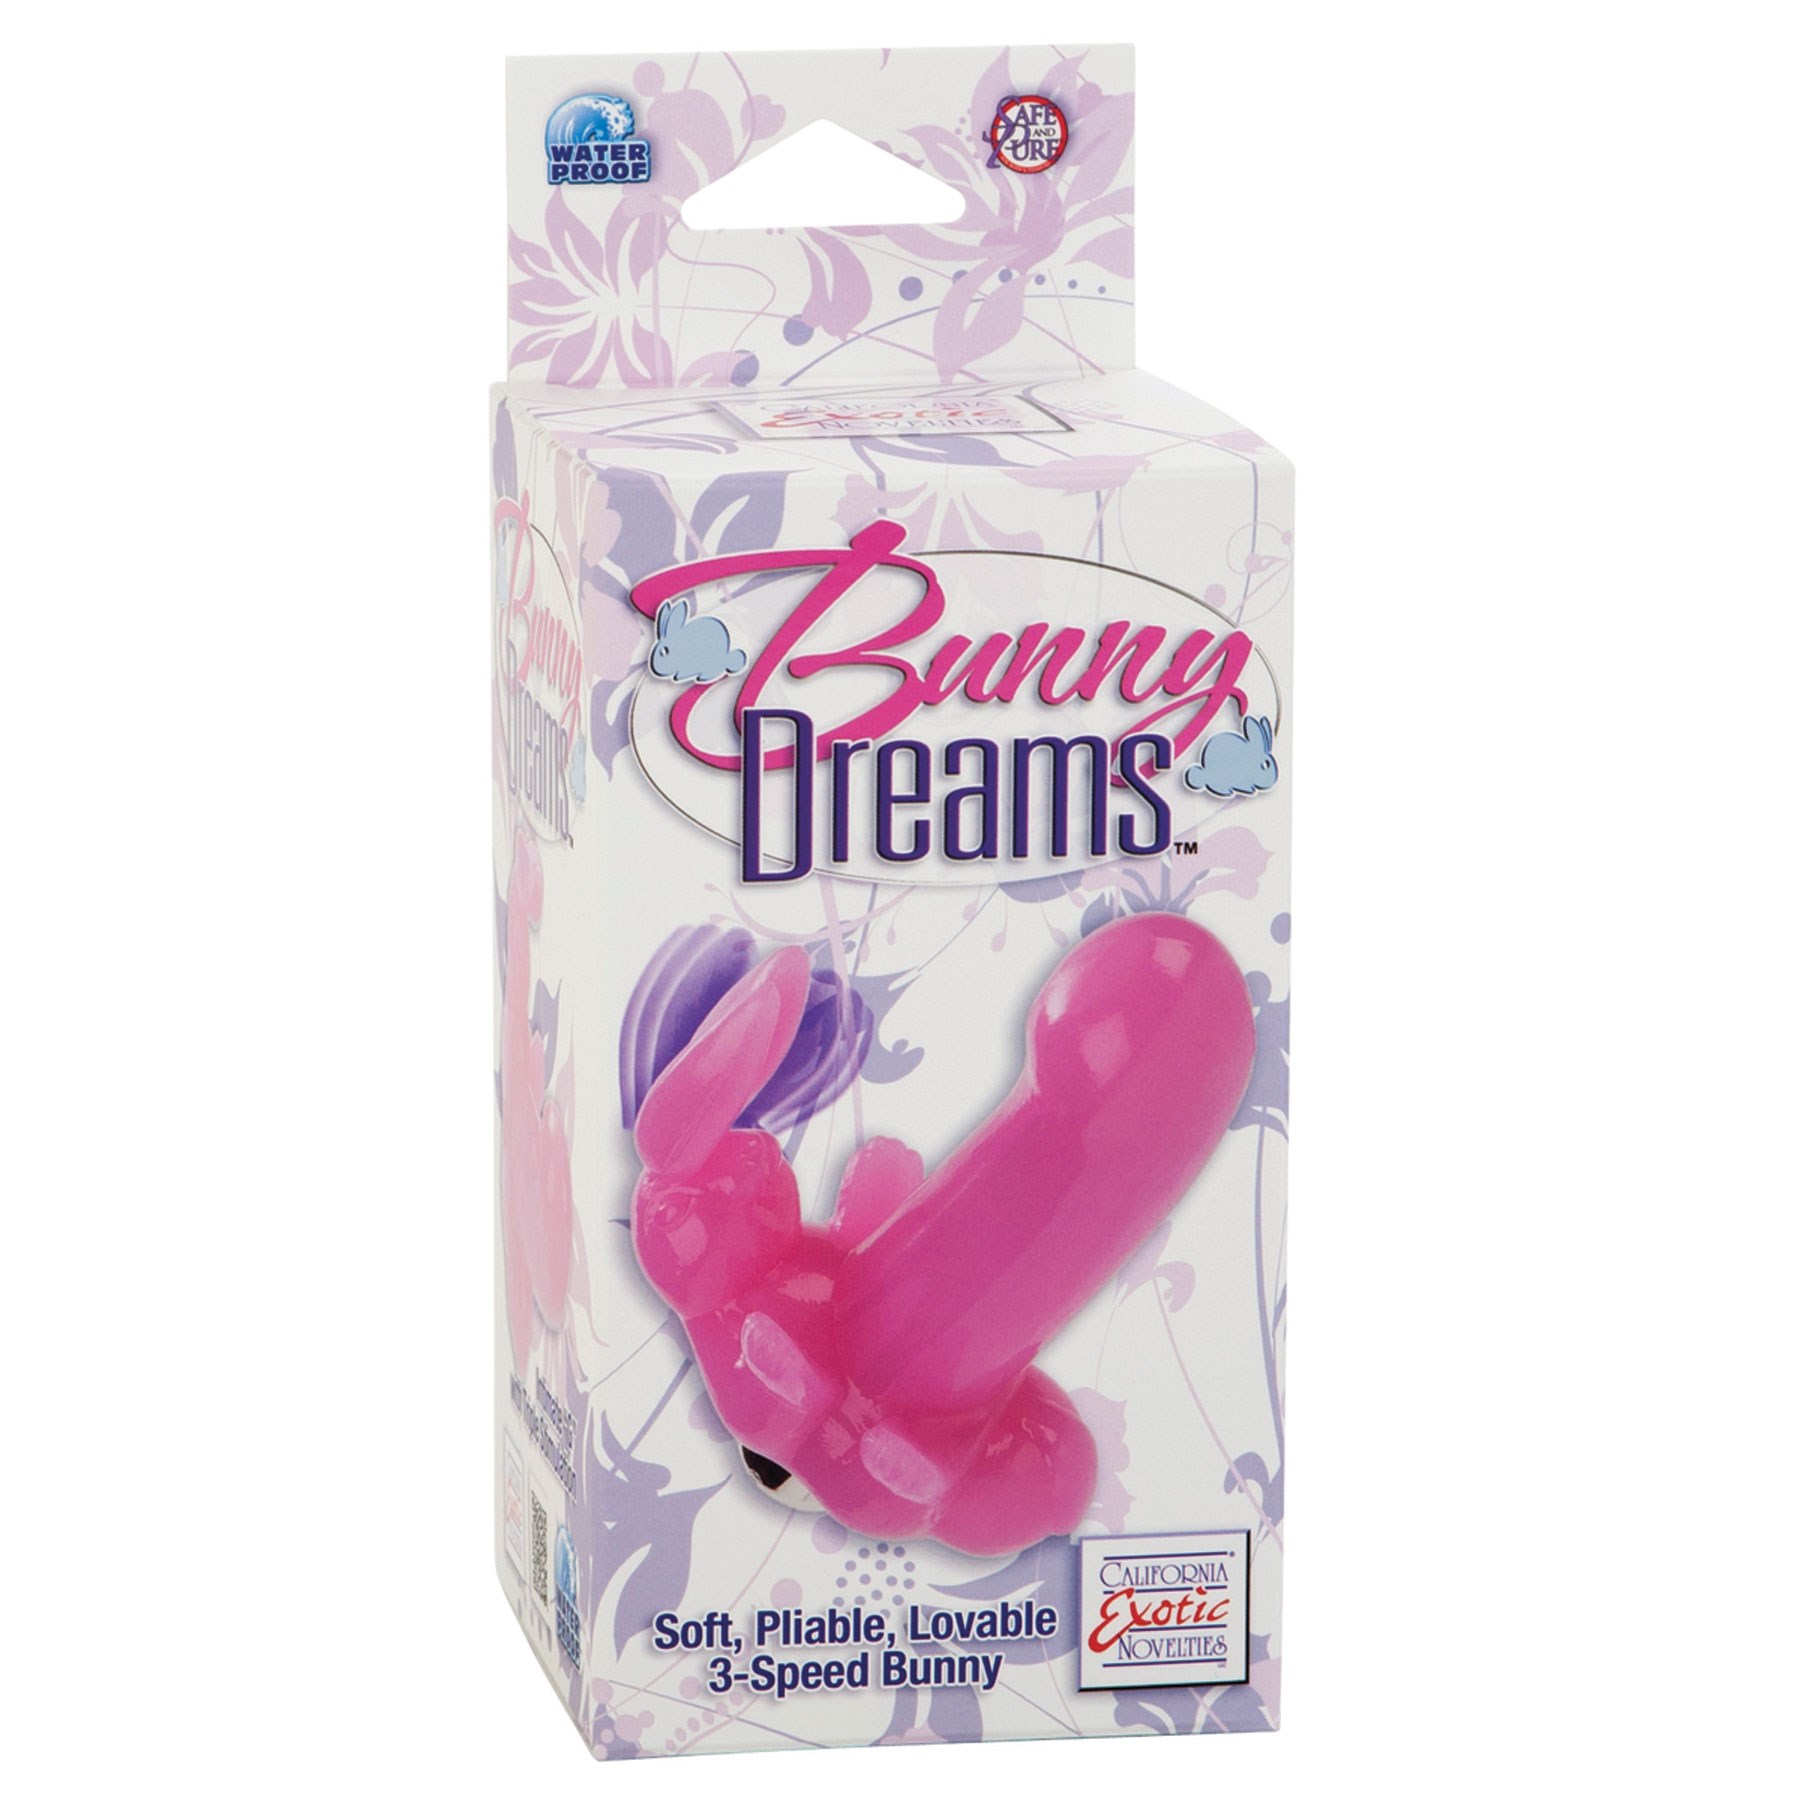 Bunny Dreams Intimate G front of box